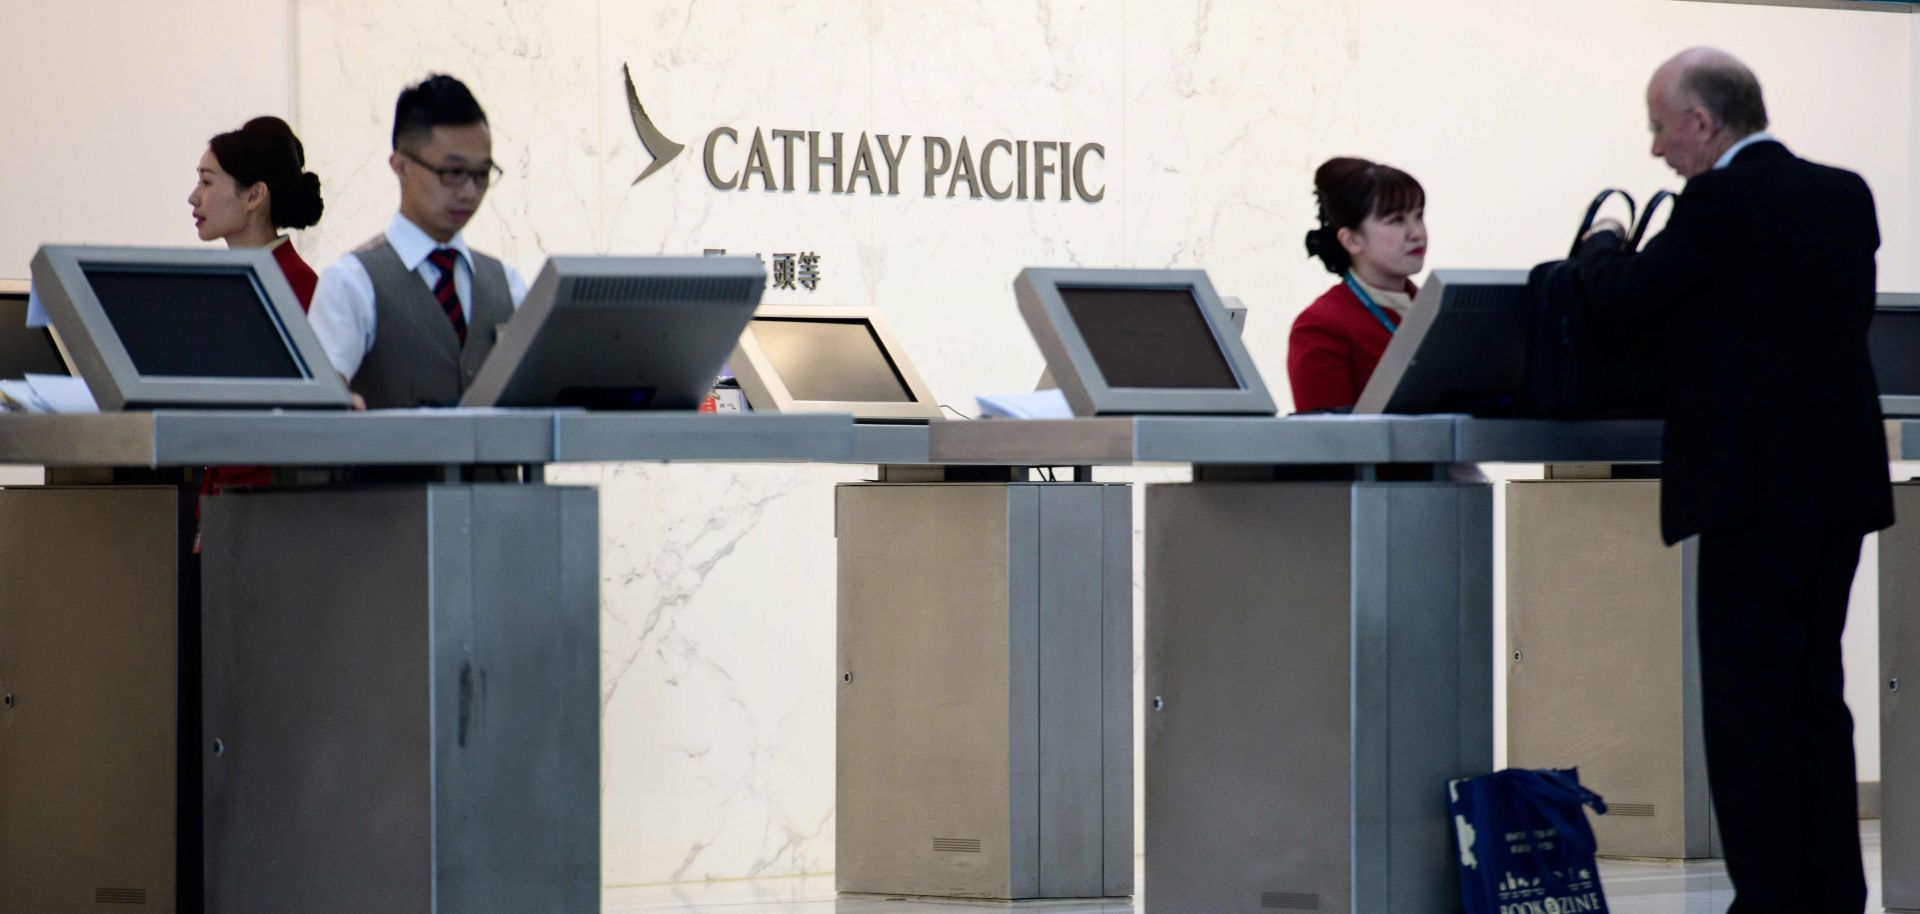 An employee of Cathay Pacific Airways helps a customer at Hong Kong's international airport on Aug. 7, 2018.